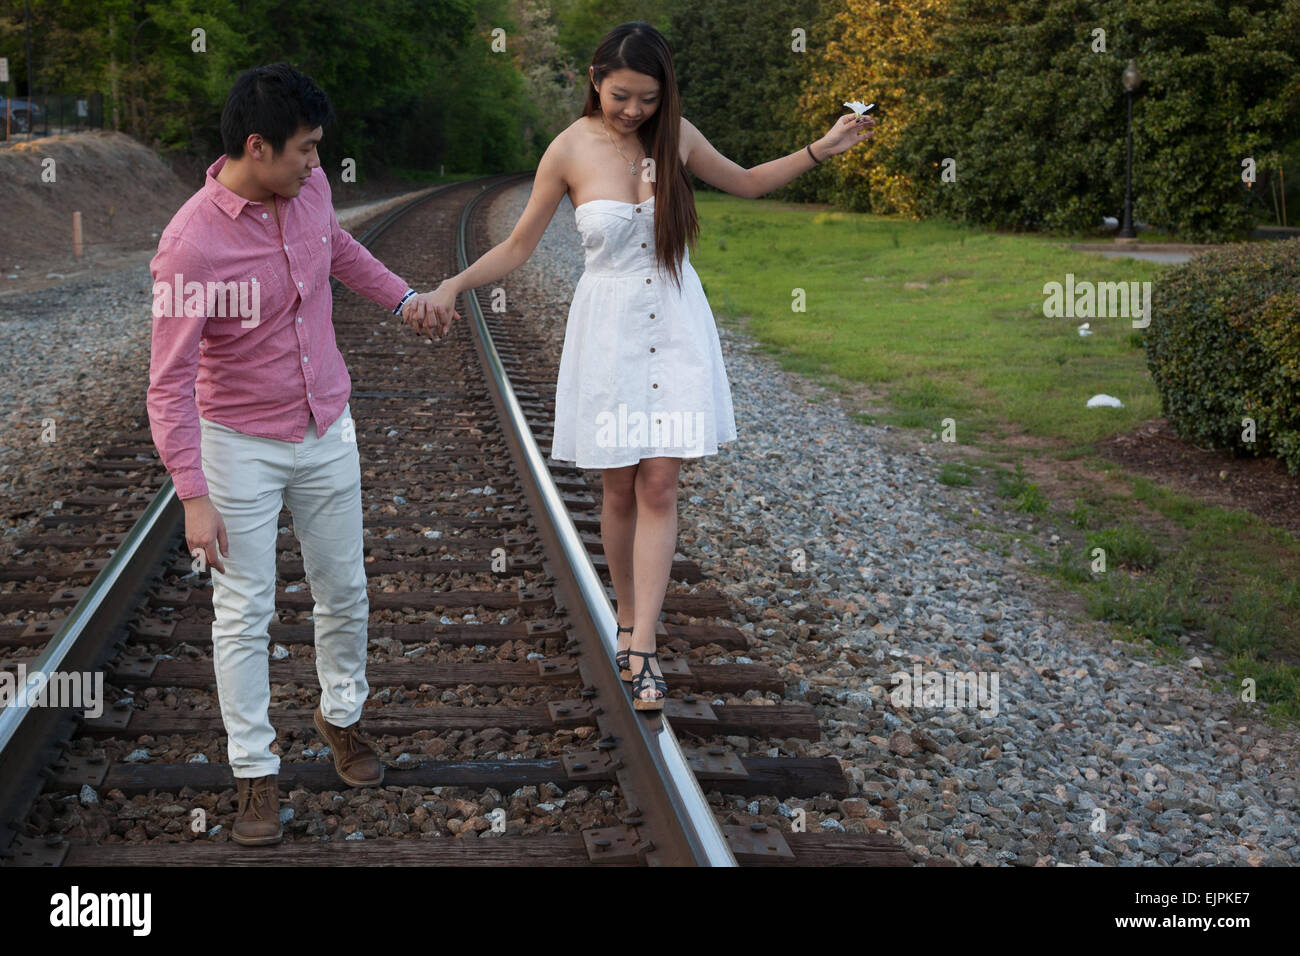 Romantic Asian couple playing outside on railroad tracks, being affectionate and smiling Stock Photo